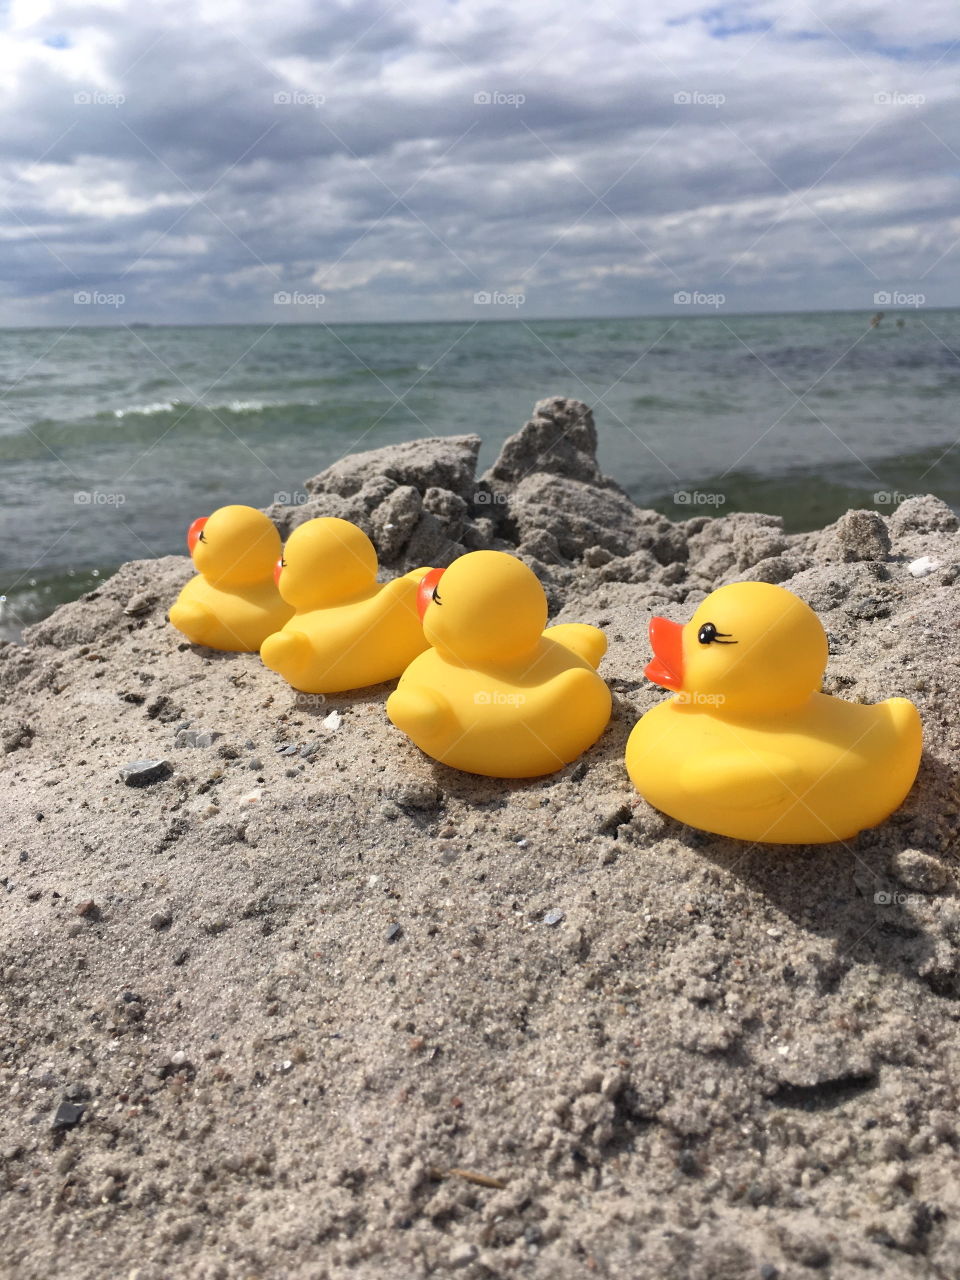 Rubber ducks going for a swim at the beach.